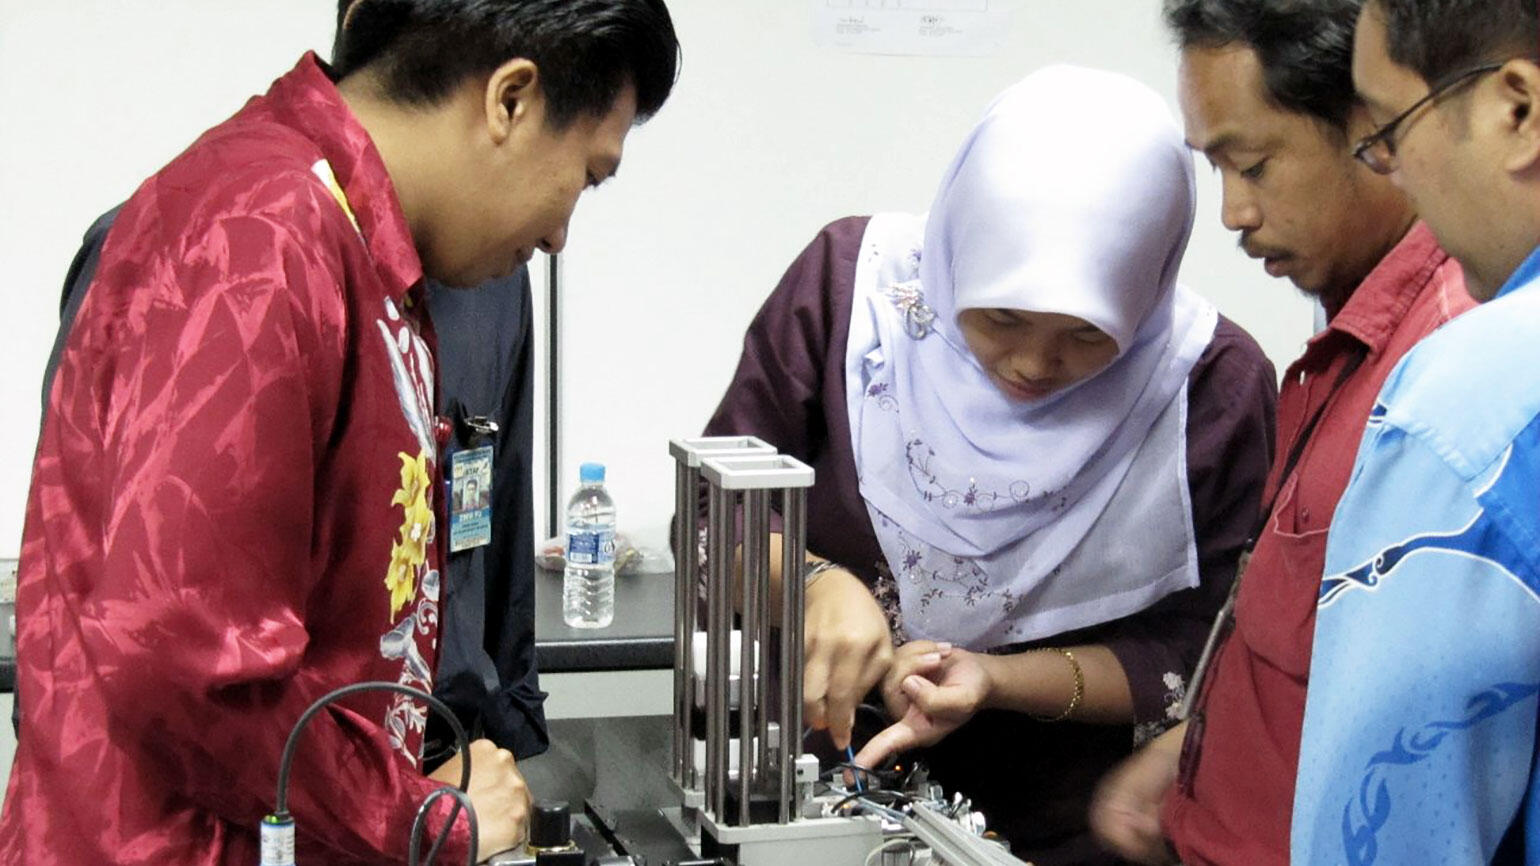 two men and a woman from Malaysia working in a workshop